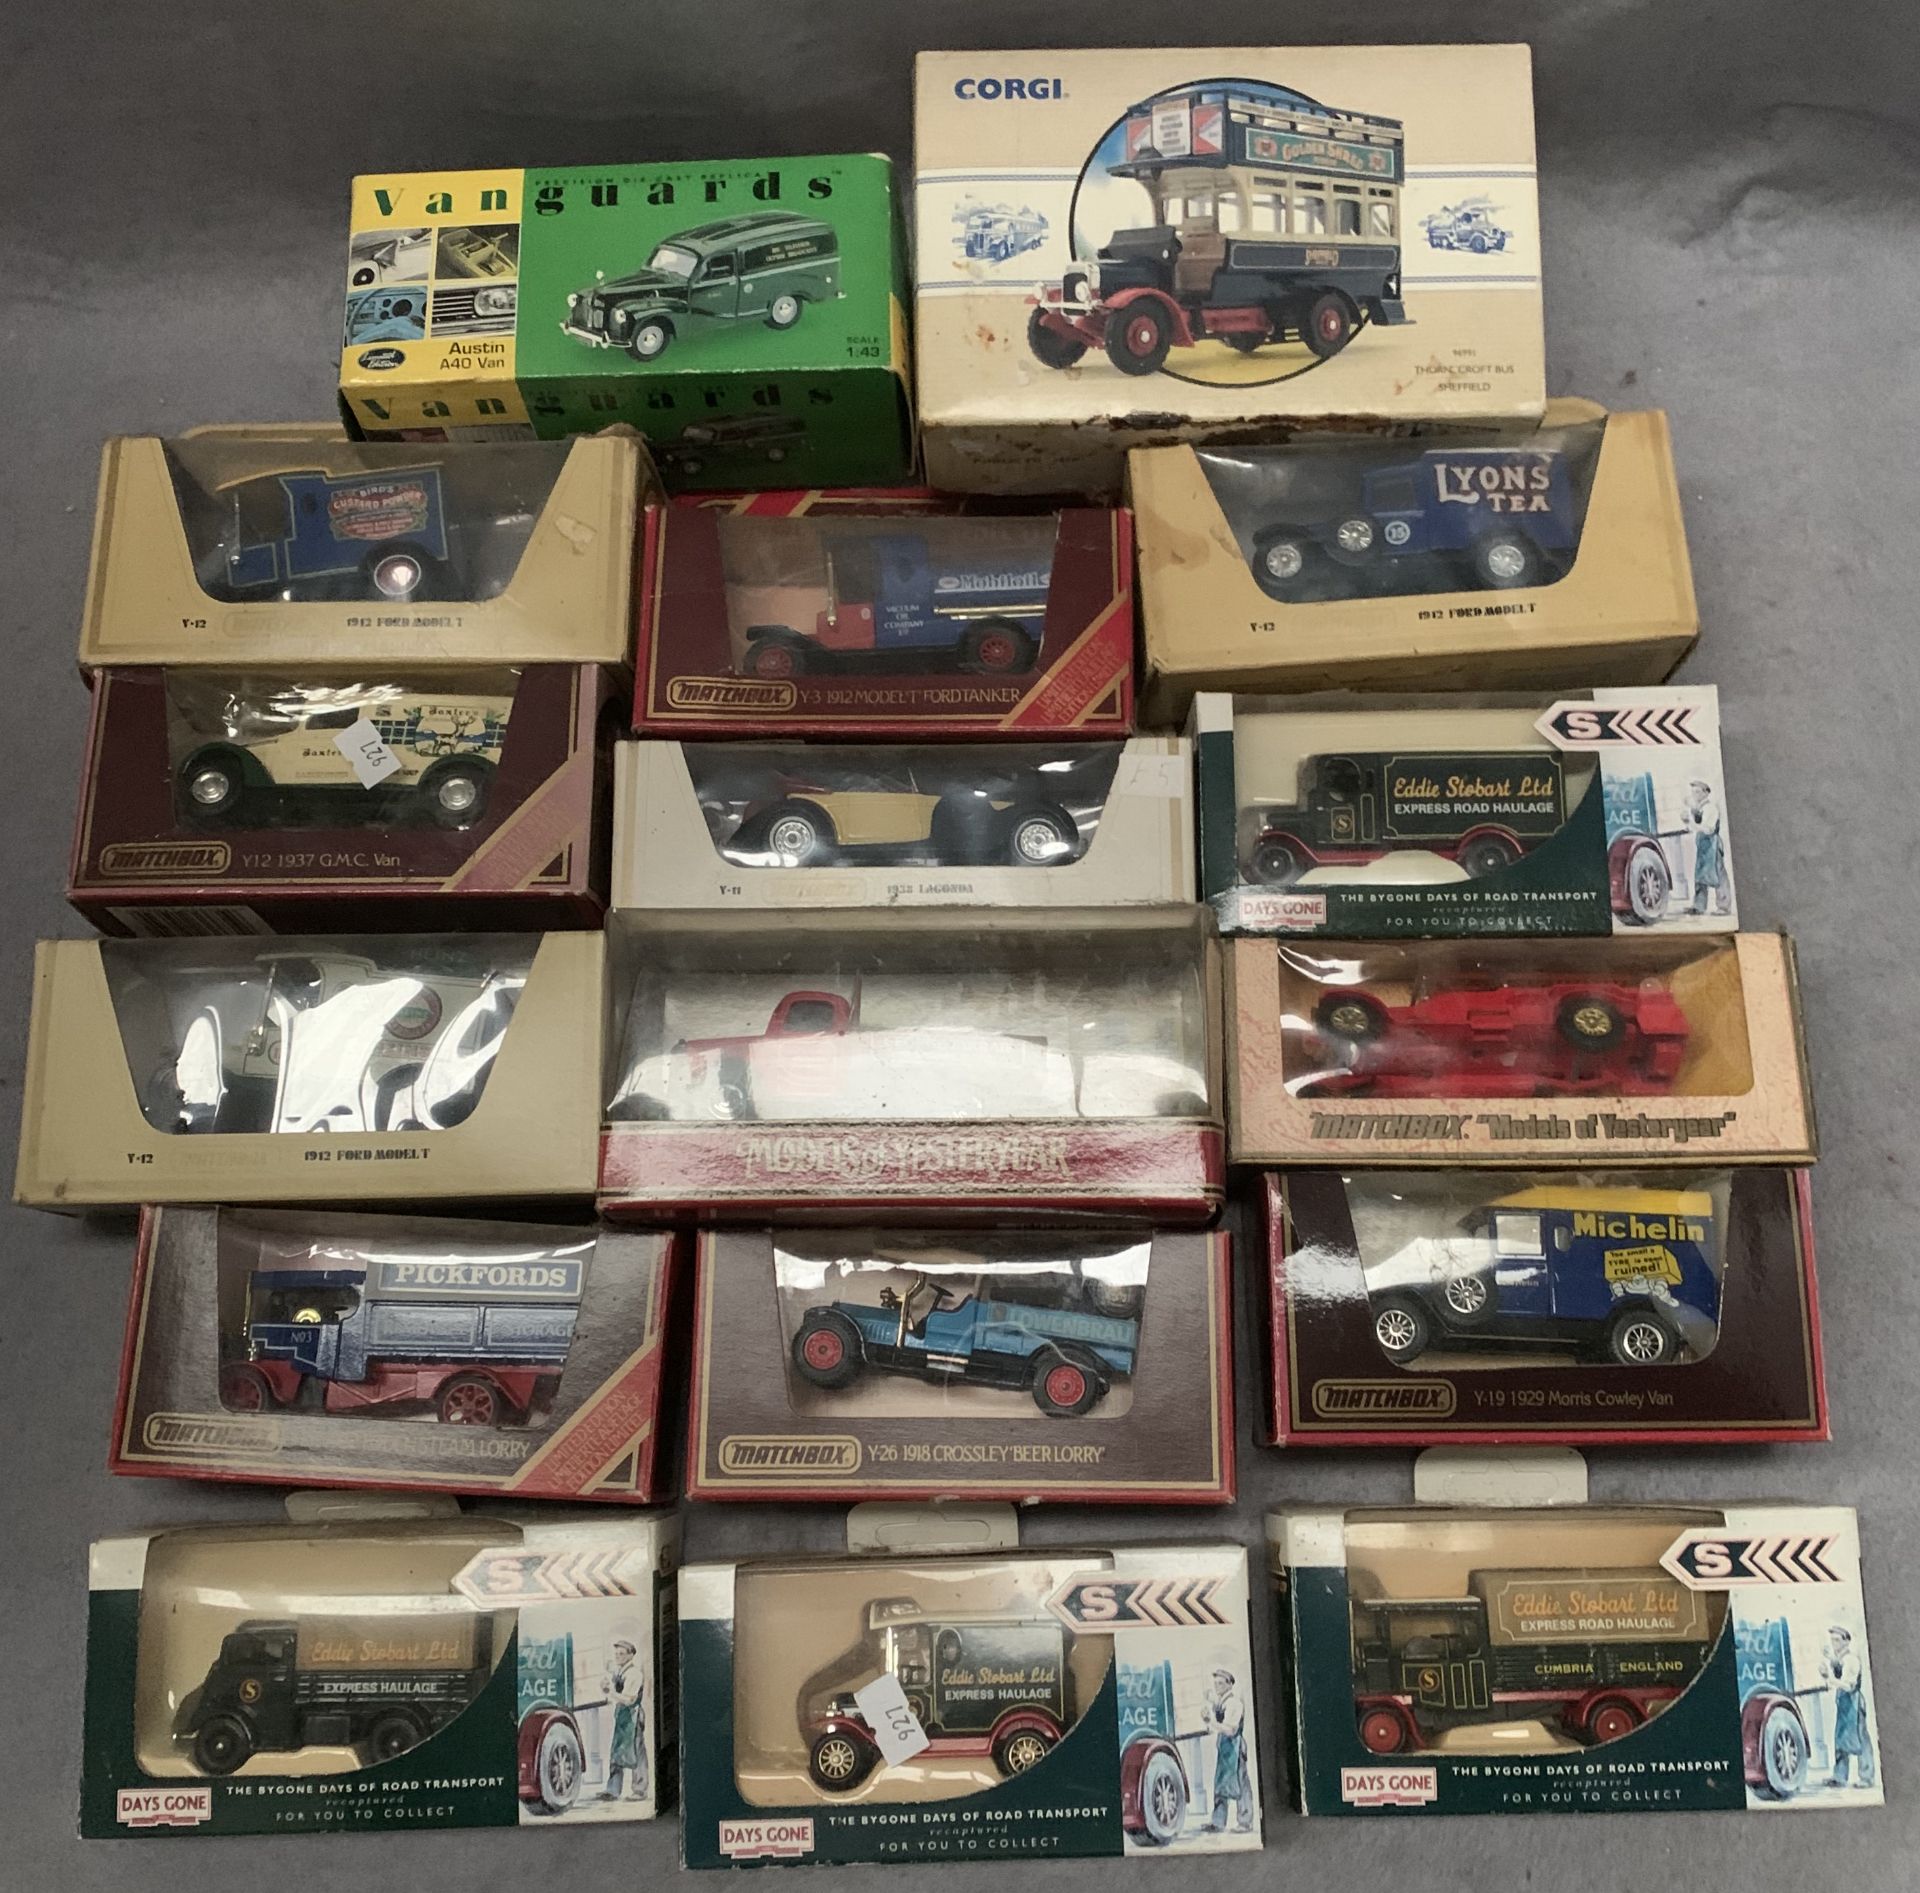 17 boxed diecast model cars - mainly models of Yesteryear and includes Corgi and Days Gone